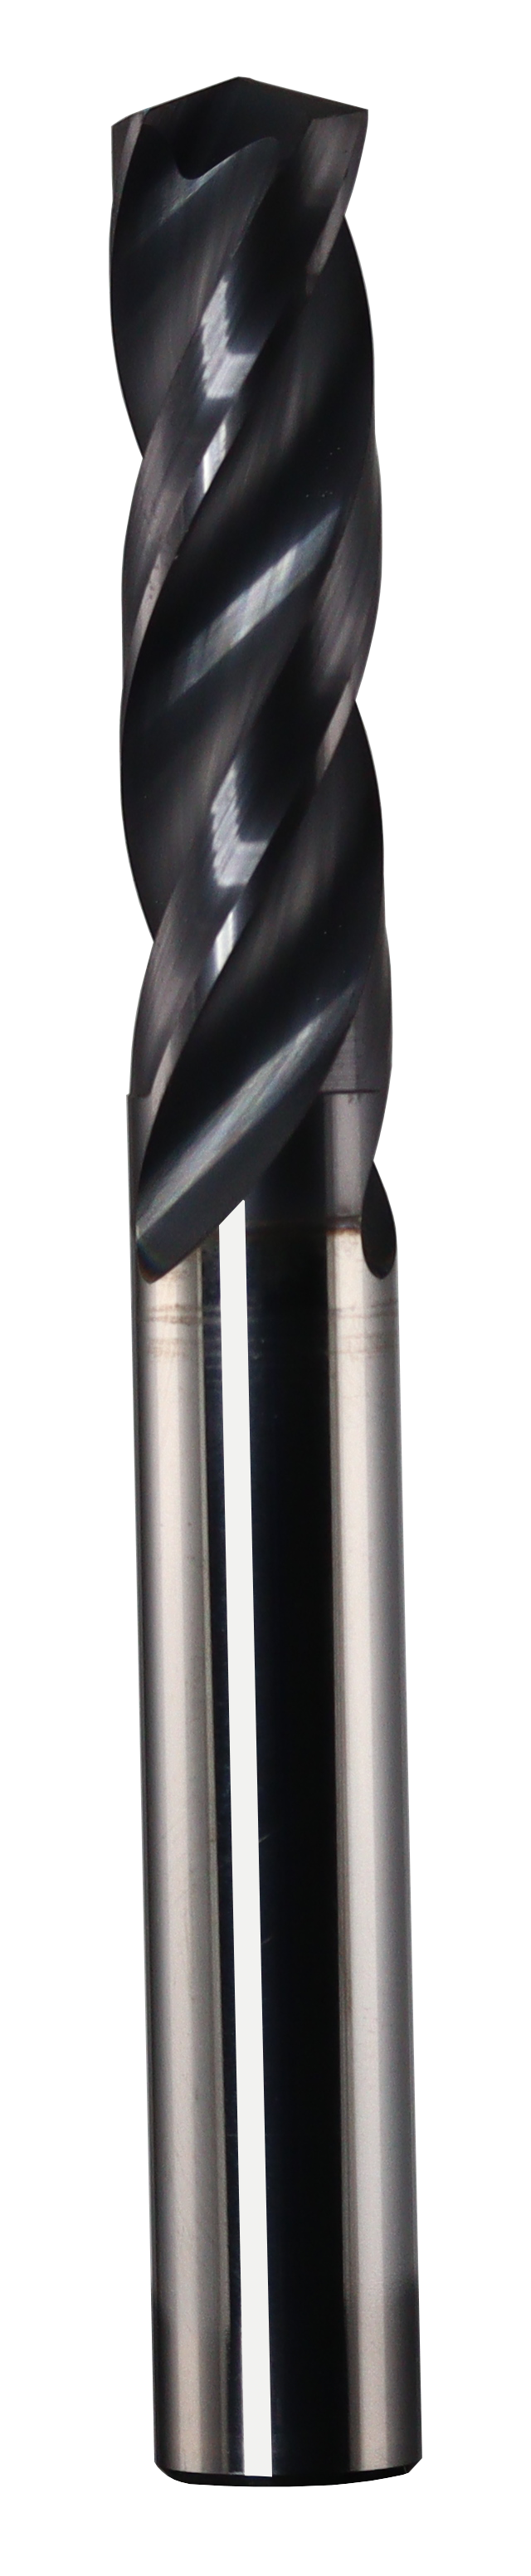 3.30mm Dia, 150 Degree Point, Solid Carbide Drill - 68968